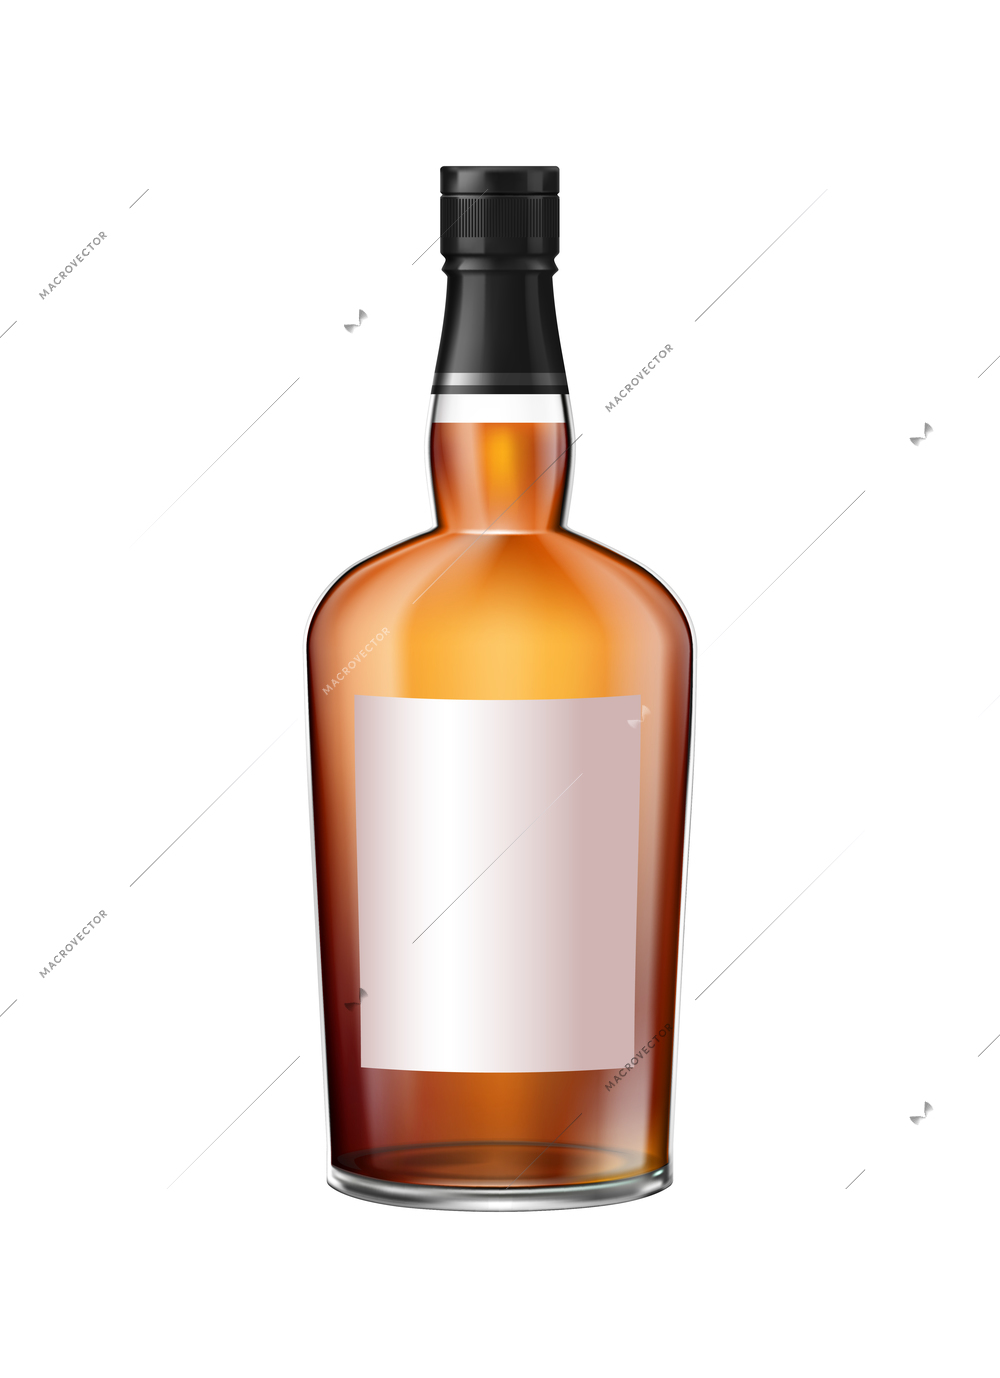 Whiskey glass bottle with blank label on white background realistic vector illustration